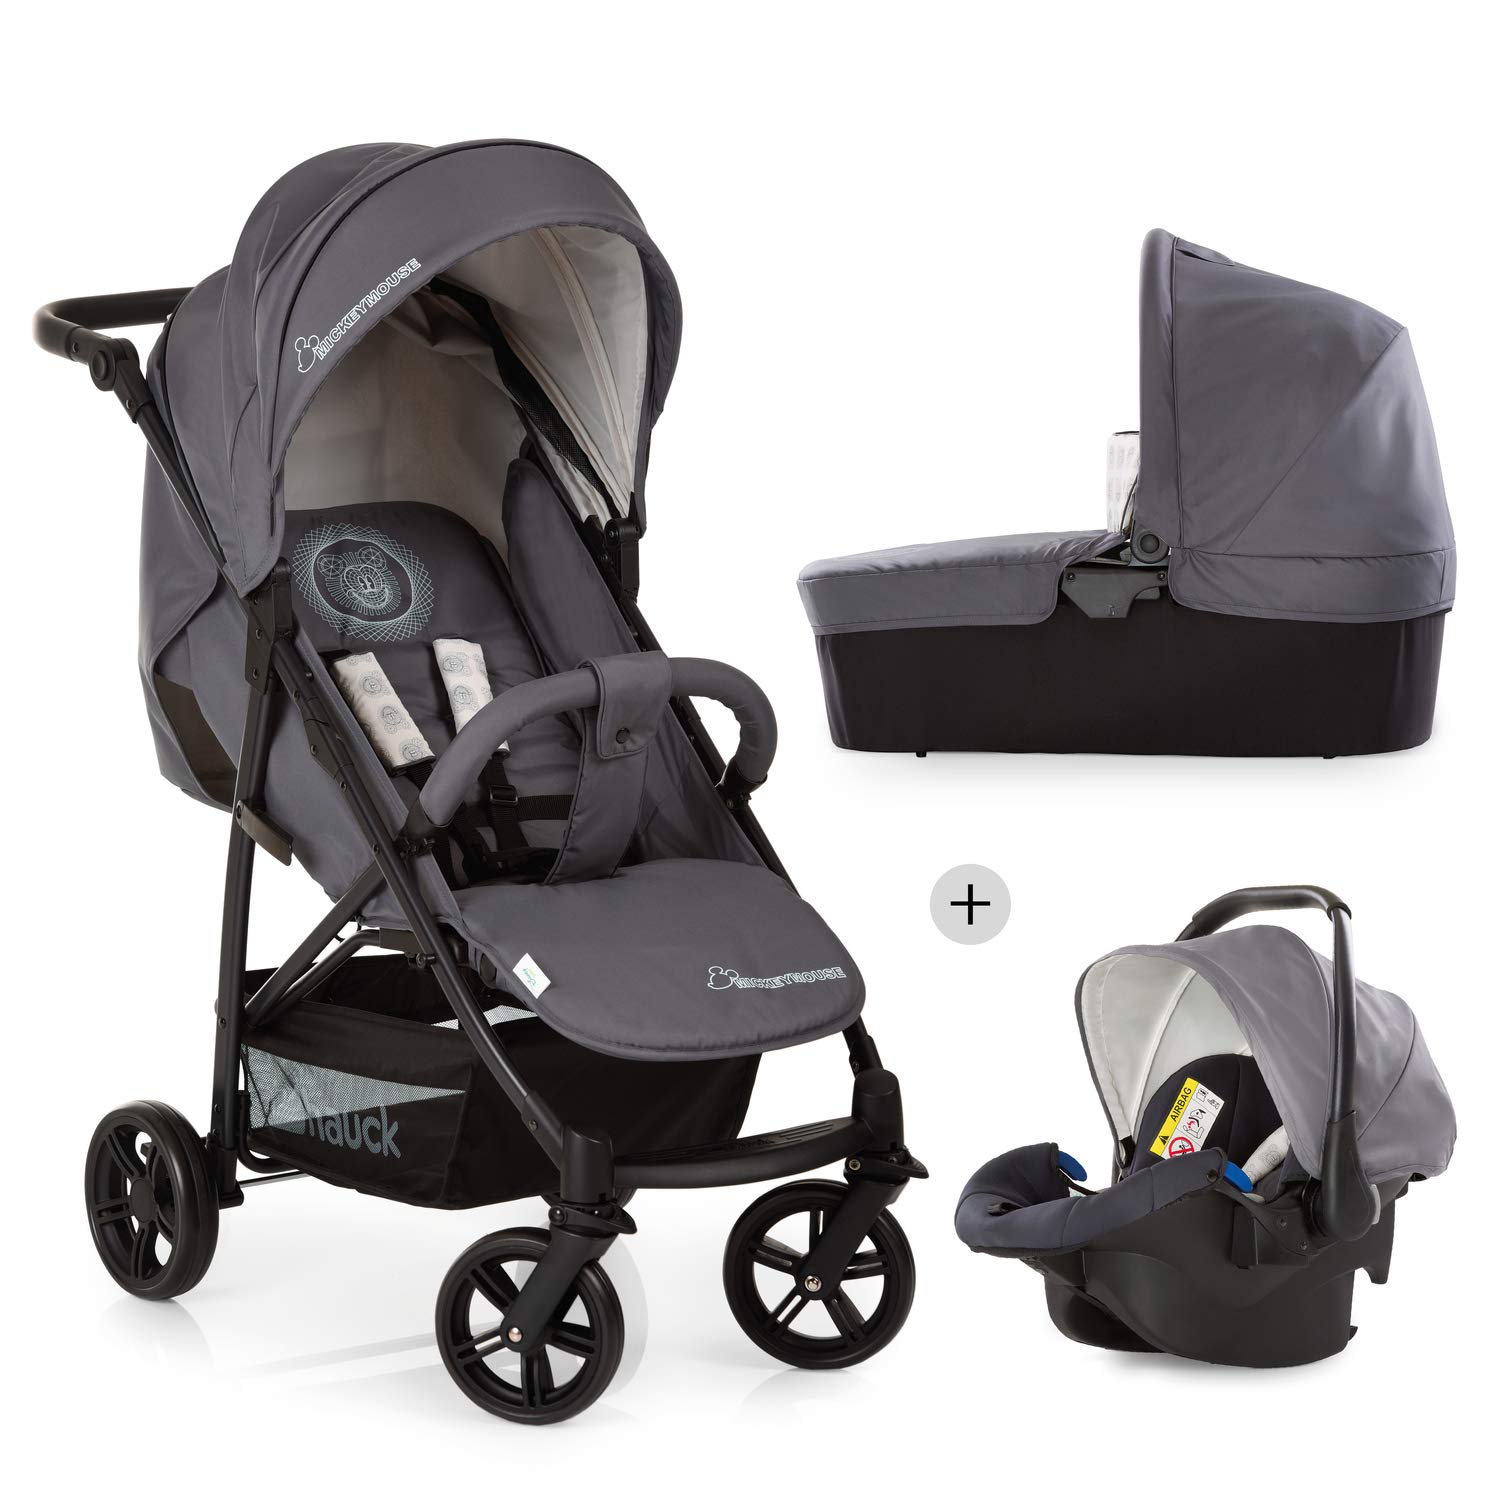 Hauck Disney Rapid 4X Plus Trio Combi Pushchair Set / XL Sun Cover / Baby Bath Including Mattress / Travel System with Car Seat / Quick Folding / Height Adjustable / Up to 25 kg / Mickey Grey